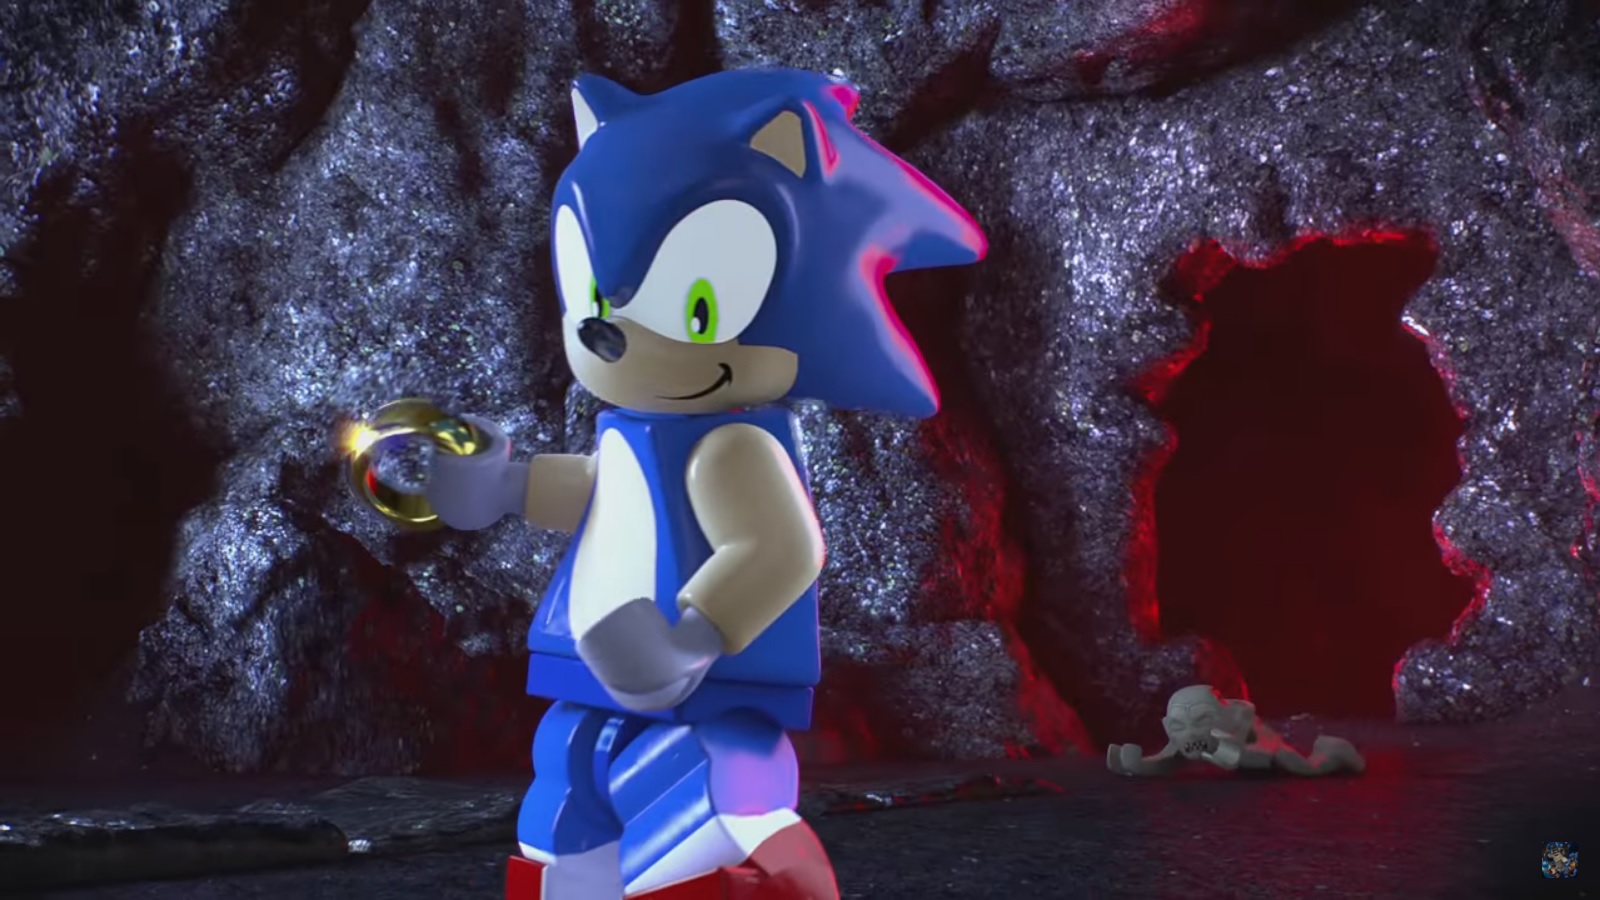 Sonic The Hedgehog Is Coming To Lego Dimensions, Here's What We Know